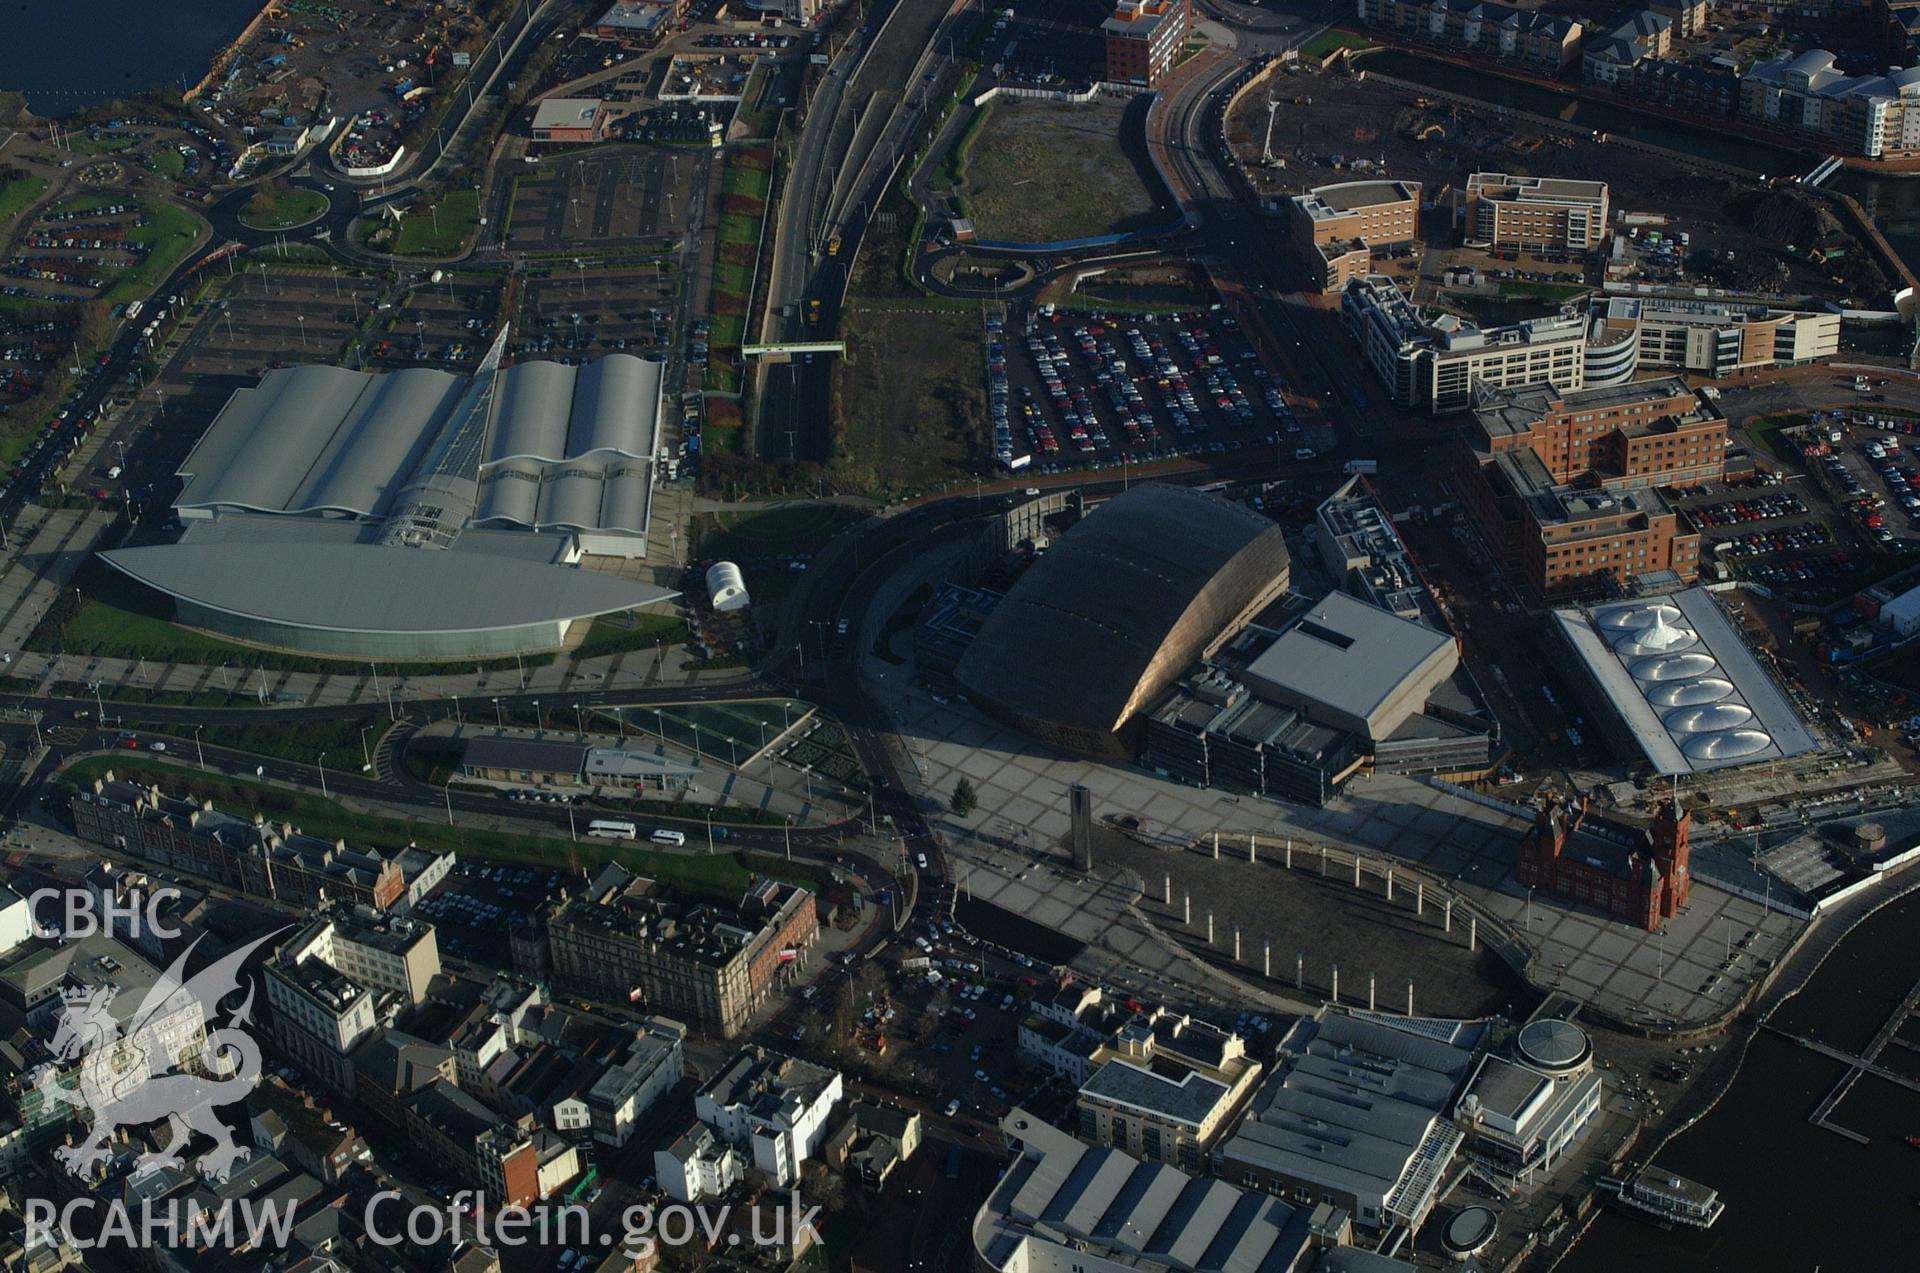 RCAHMW colour oblique aerial photograph of the Wales Millennium Centre taken on 13/01/2005 by Toby Driver